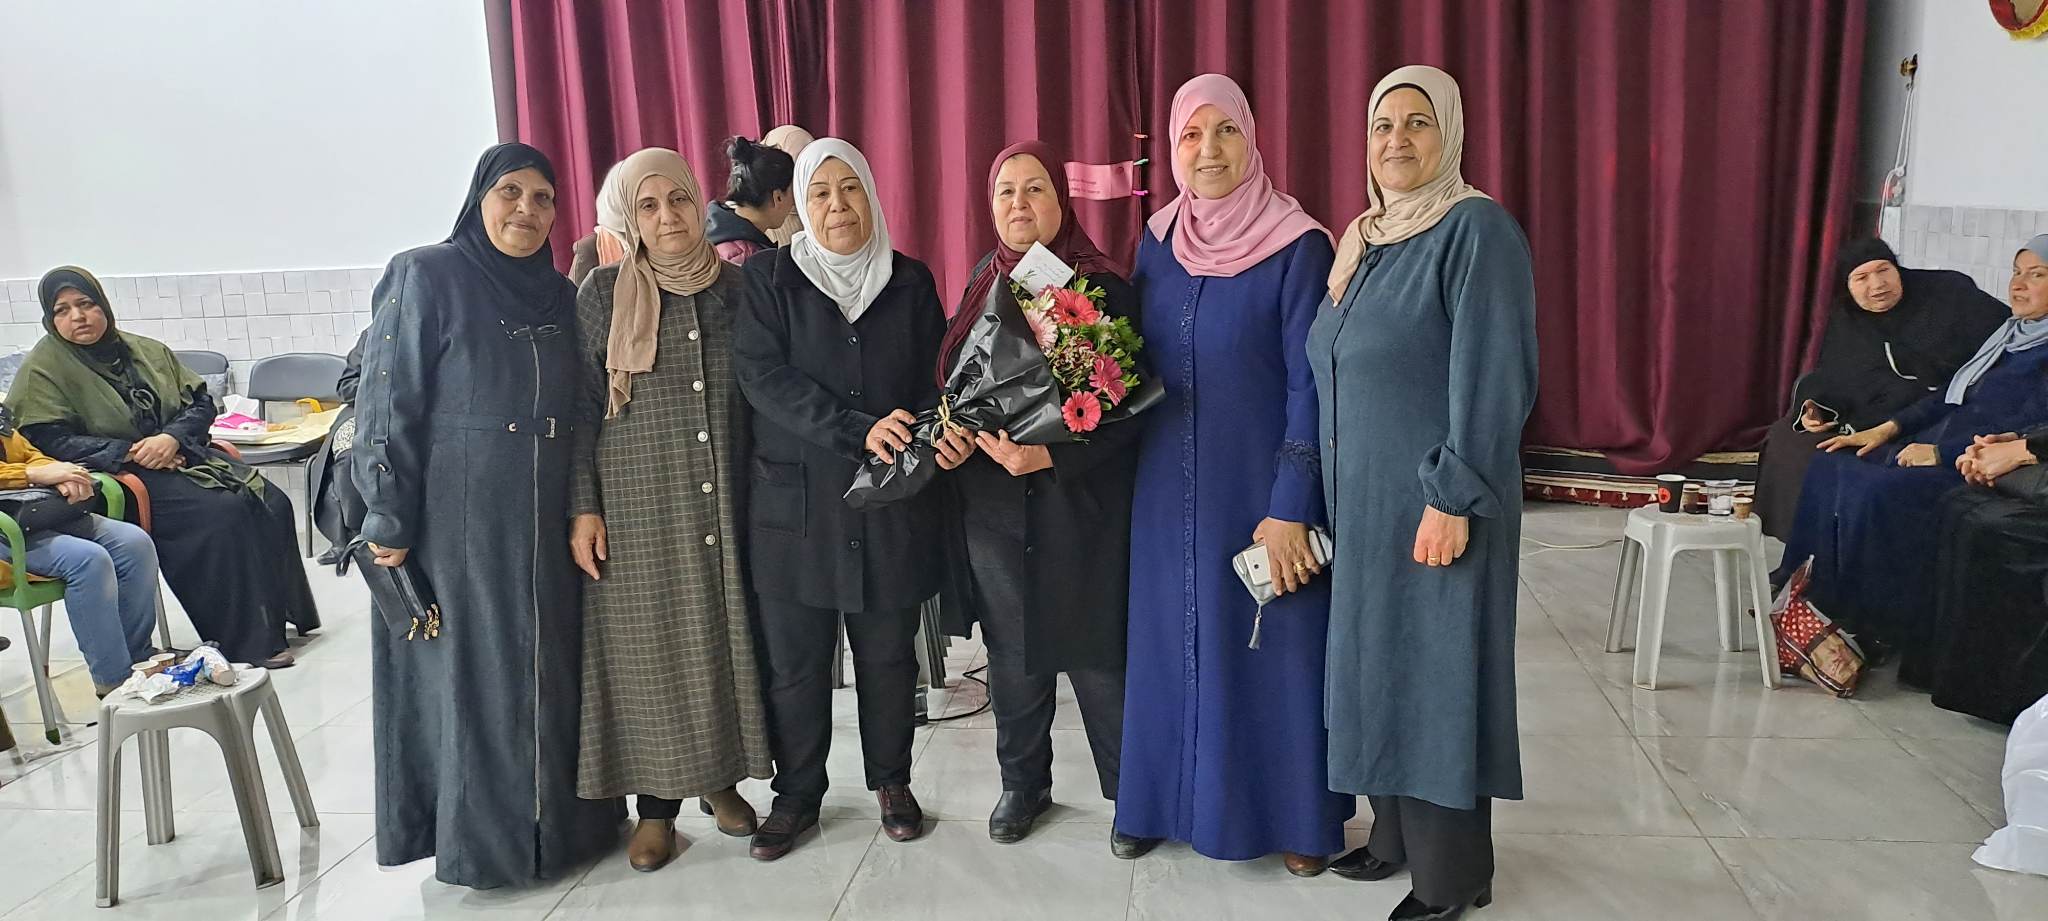 In order not to forget the generosity of a number of women of Jenin camp